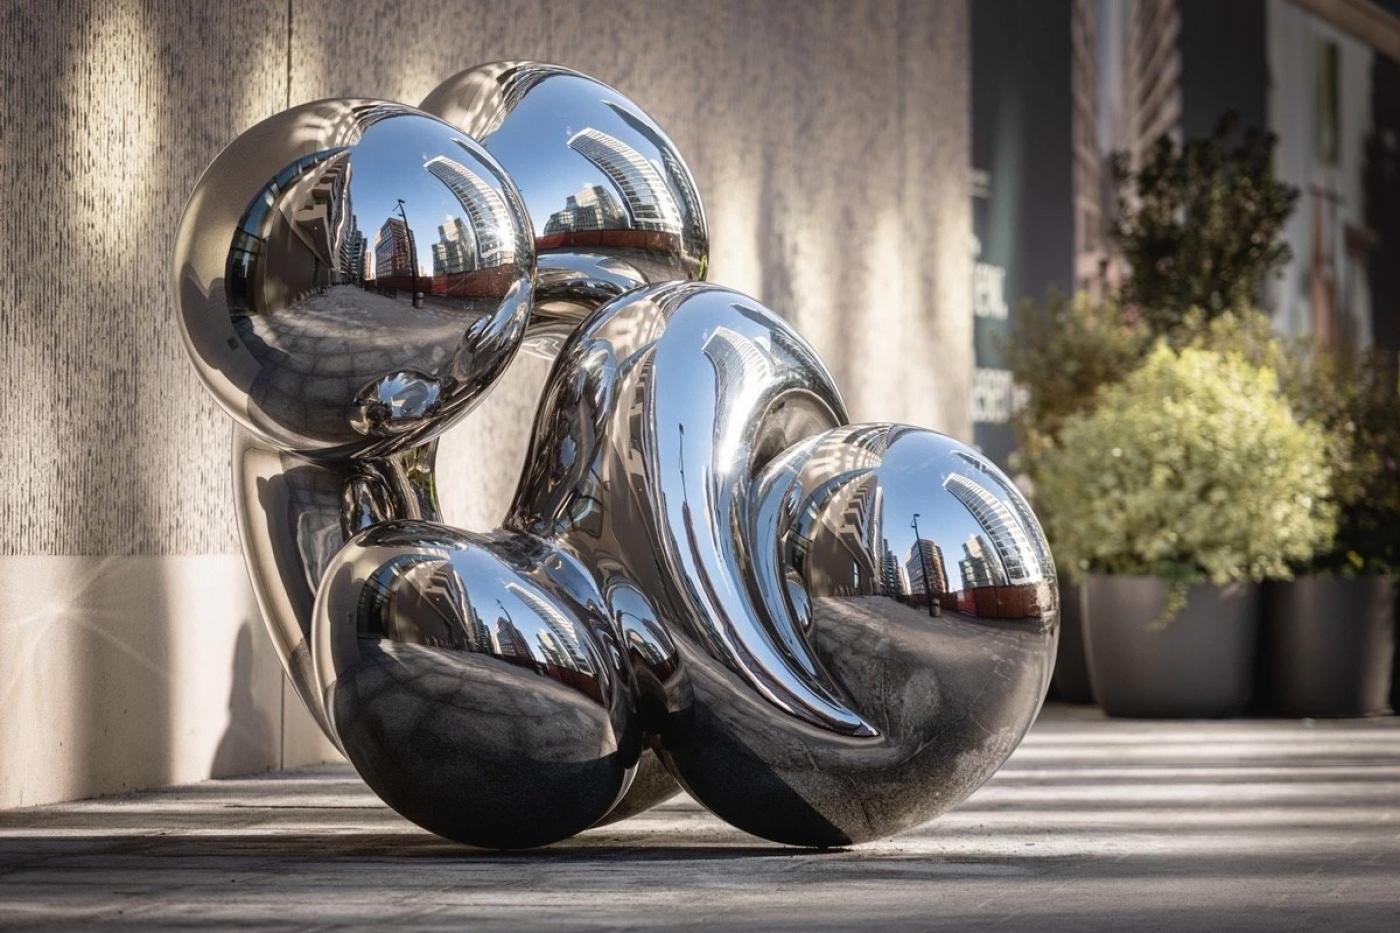 mirror polished steel knot sculpture from Richard Hudson exhibiting in DIFC, Dubai. 